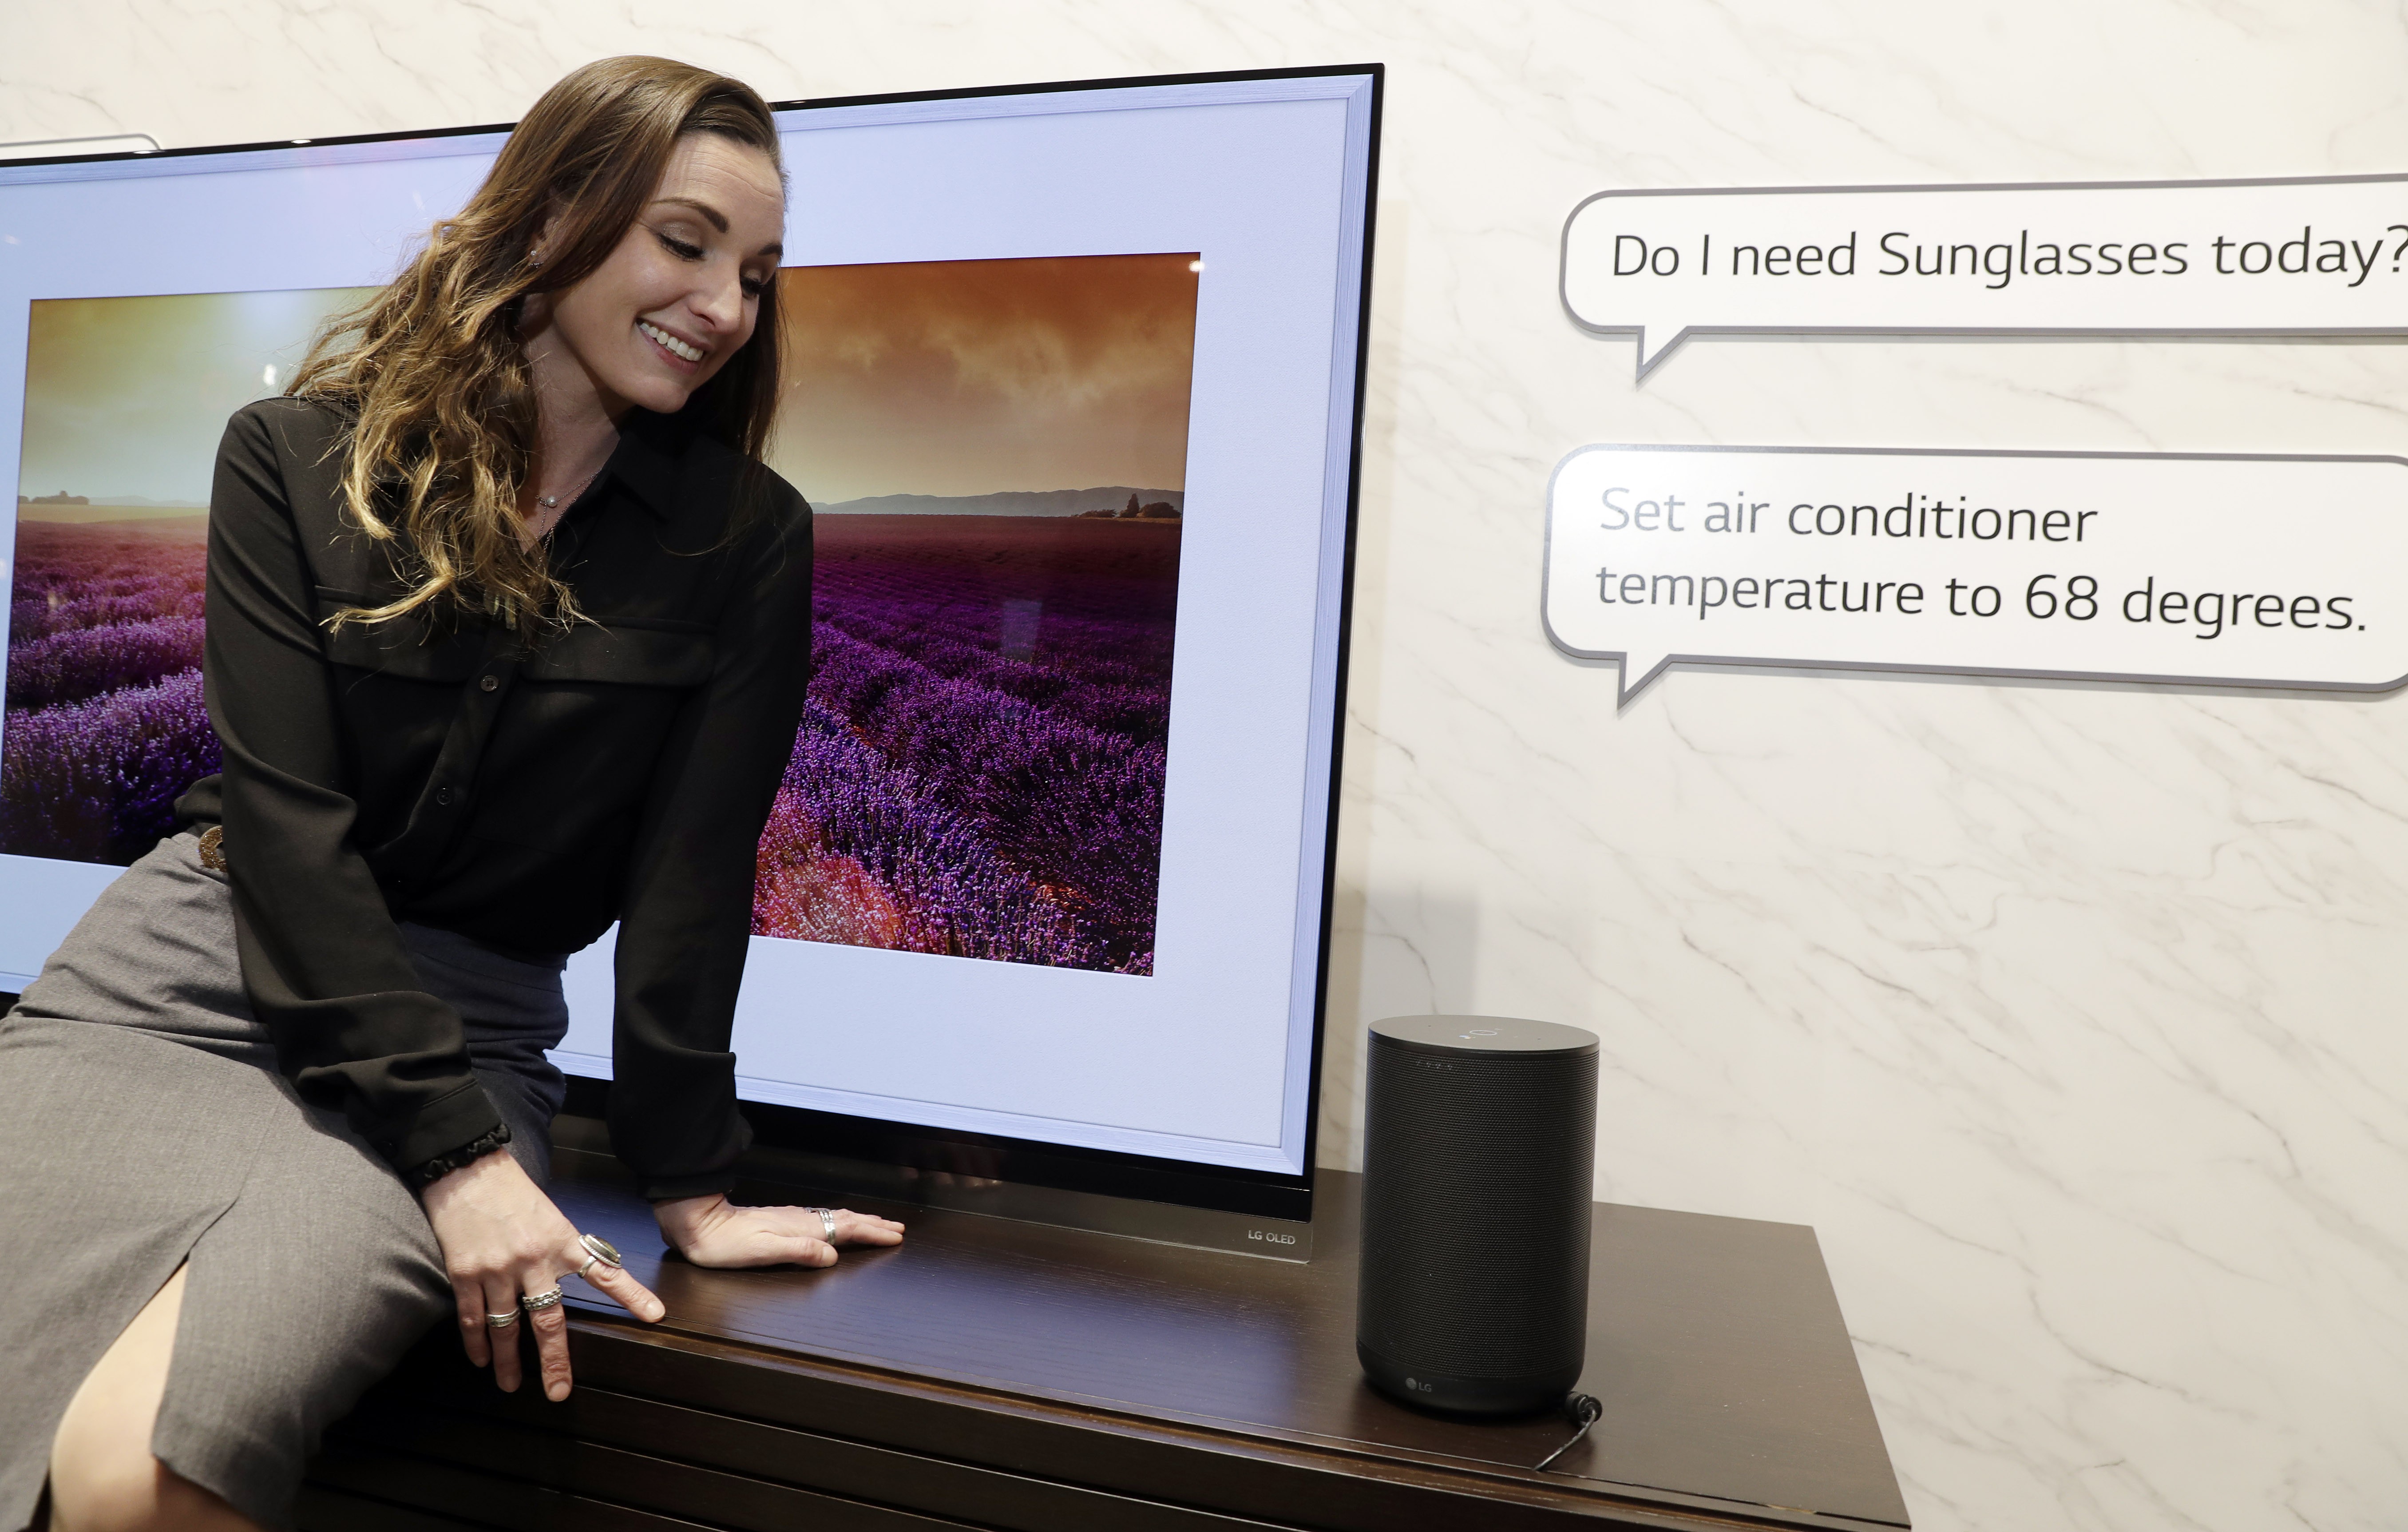 Woman sitting in front of an LG TV while facing the LG AI speaker and asking, “Do I need Sunglasses today?” and, “Set air conditioner temperature to 68 degrees”